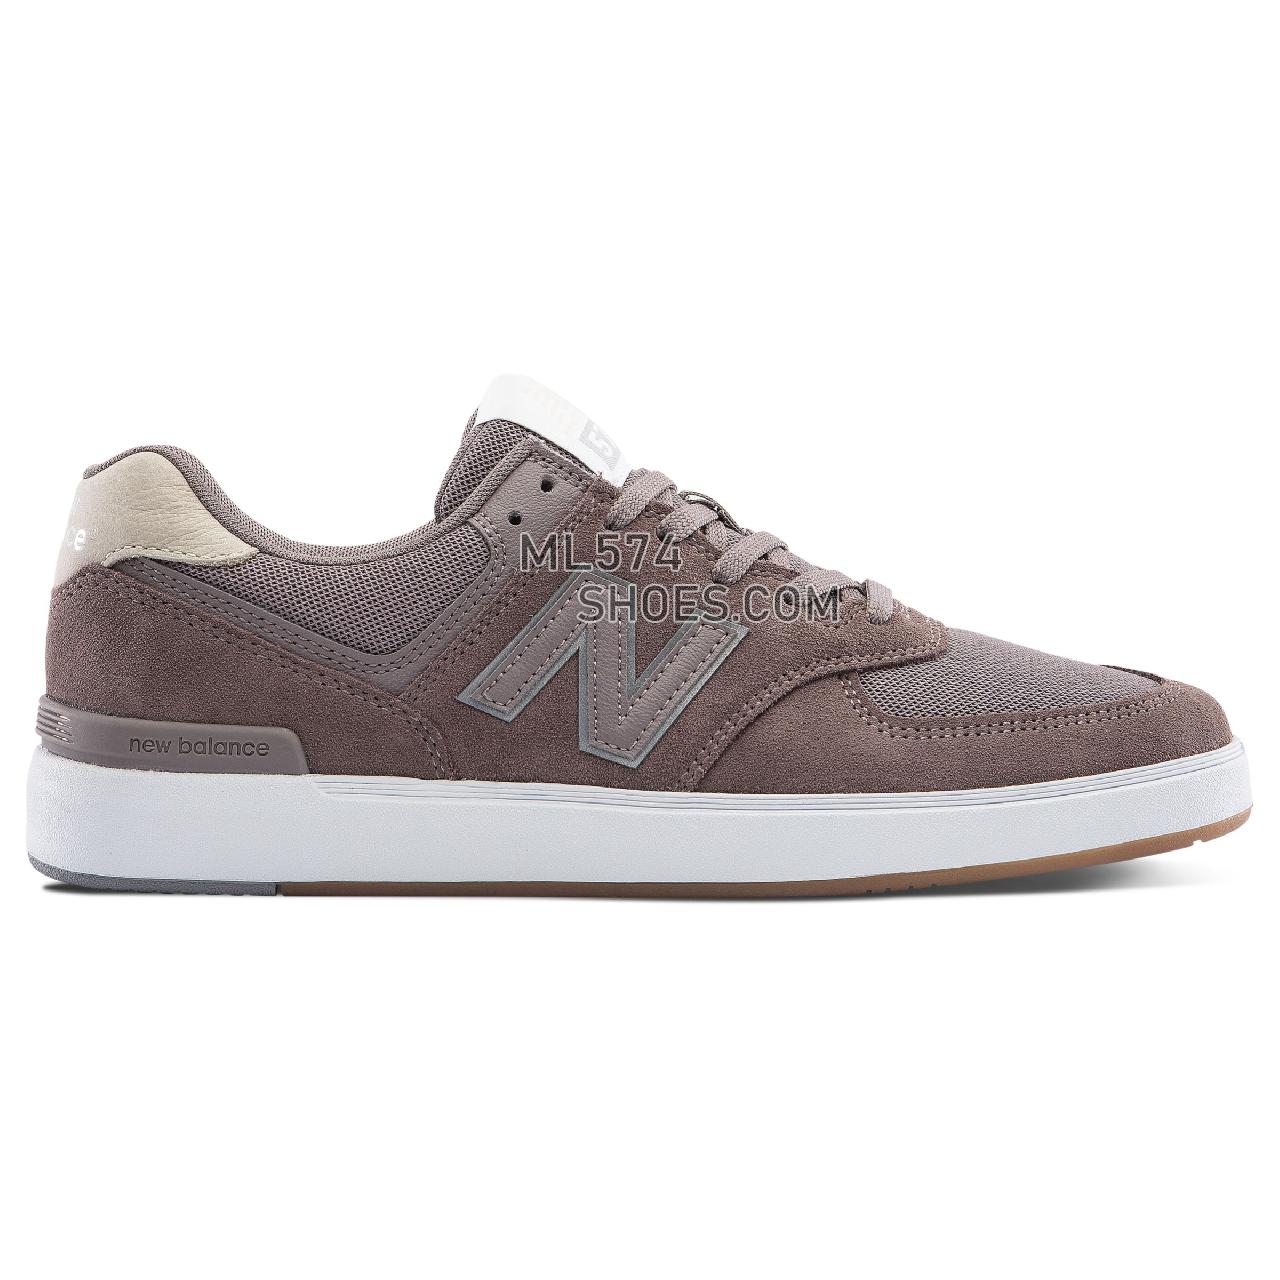 New Balance AM574 - Men's 574 - Classic Tan with White - AM574RSE